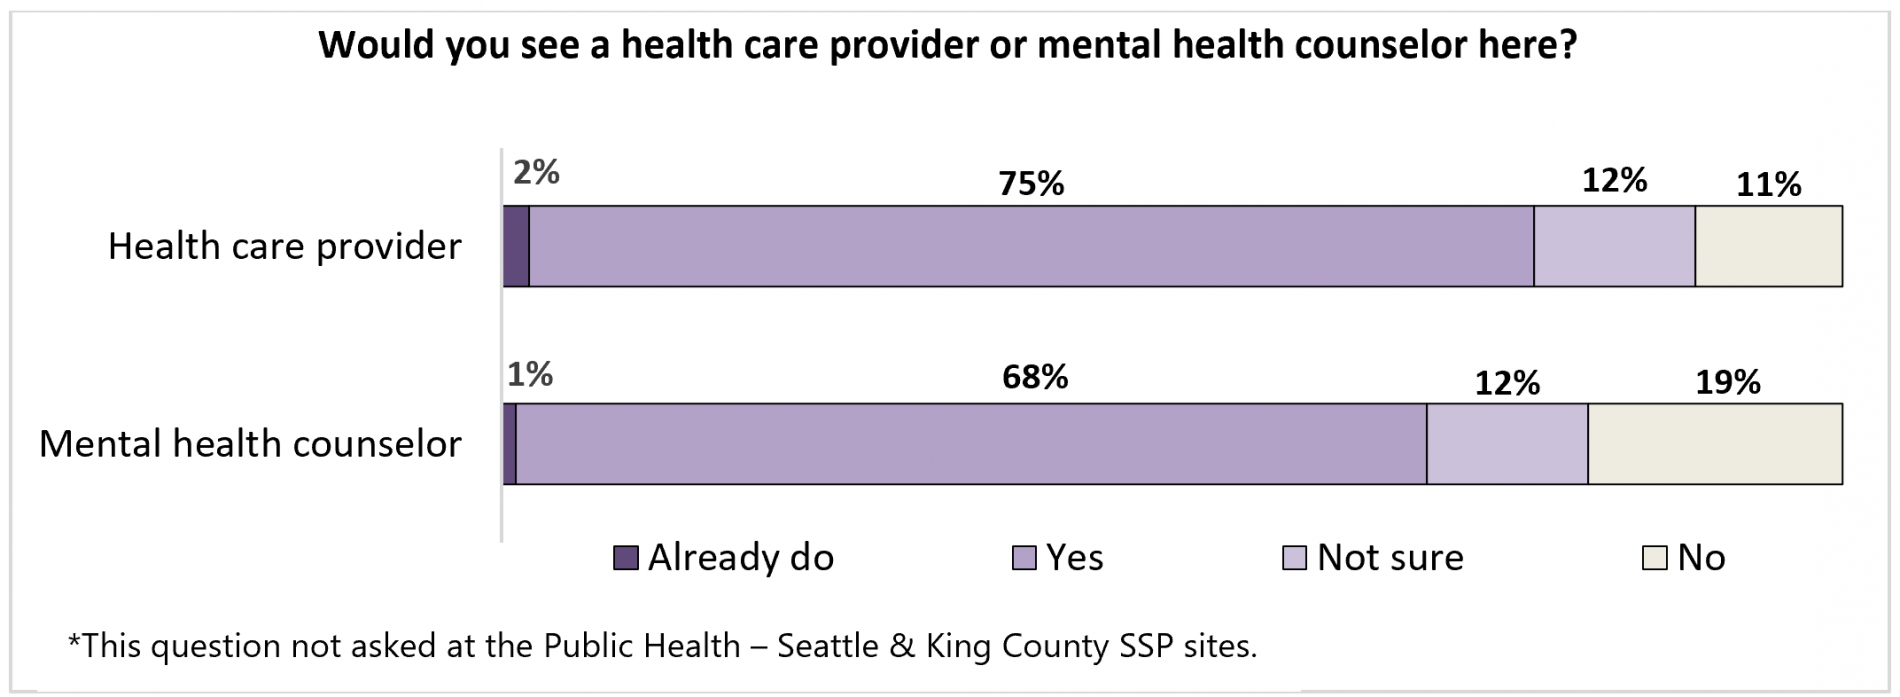 Figure 9: Would you see a health care provider or mental health counselor here? Health care provider: already do: 2%, Yes: 75%, Not sure: 12%, No: 11%. Mental health counselor: Already do: 1%, Yes: 68%, Not sure: 12%, No: 19%